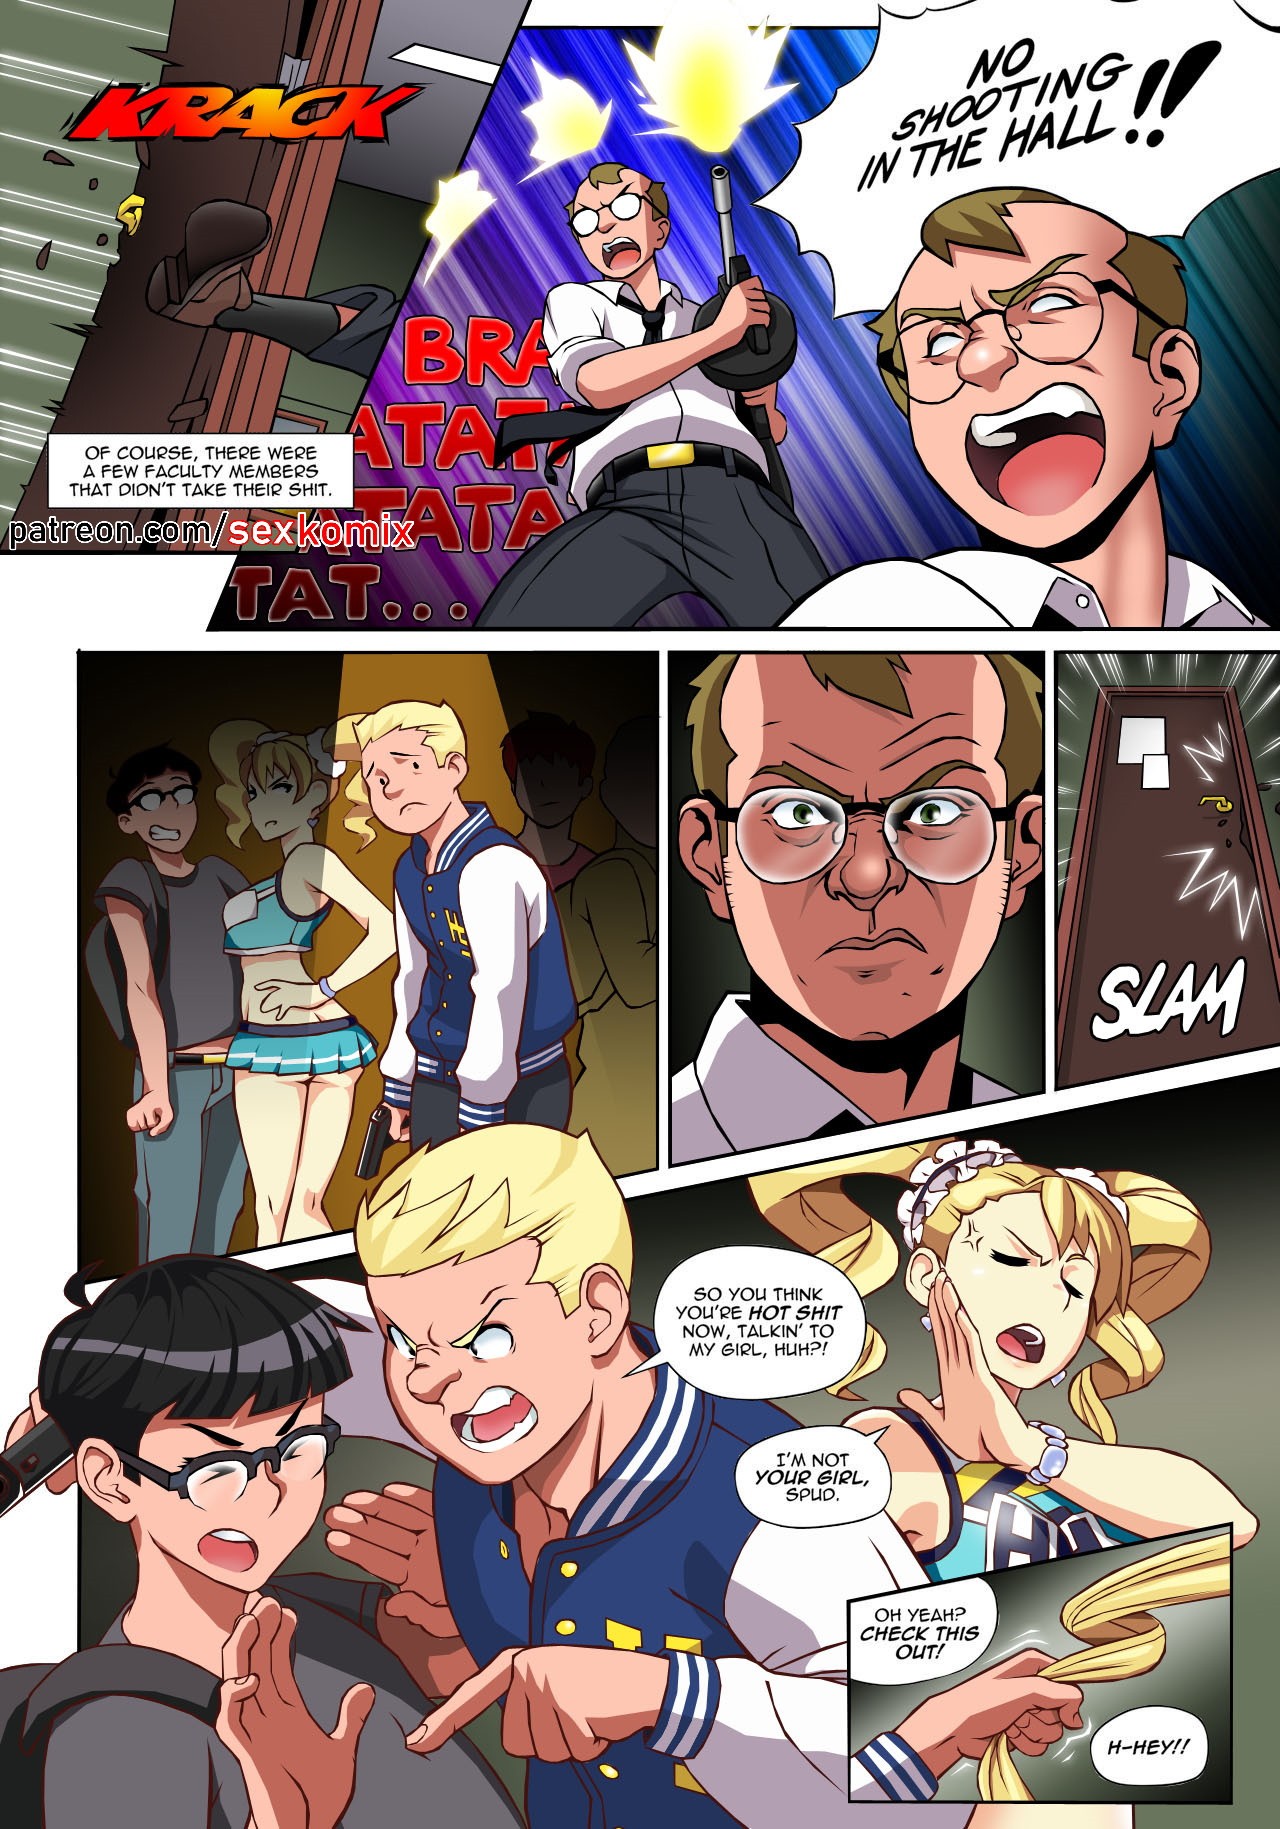 Hot Shit High! - Chapter 1 porn comic picture 6